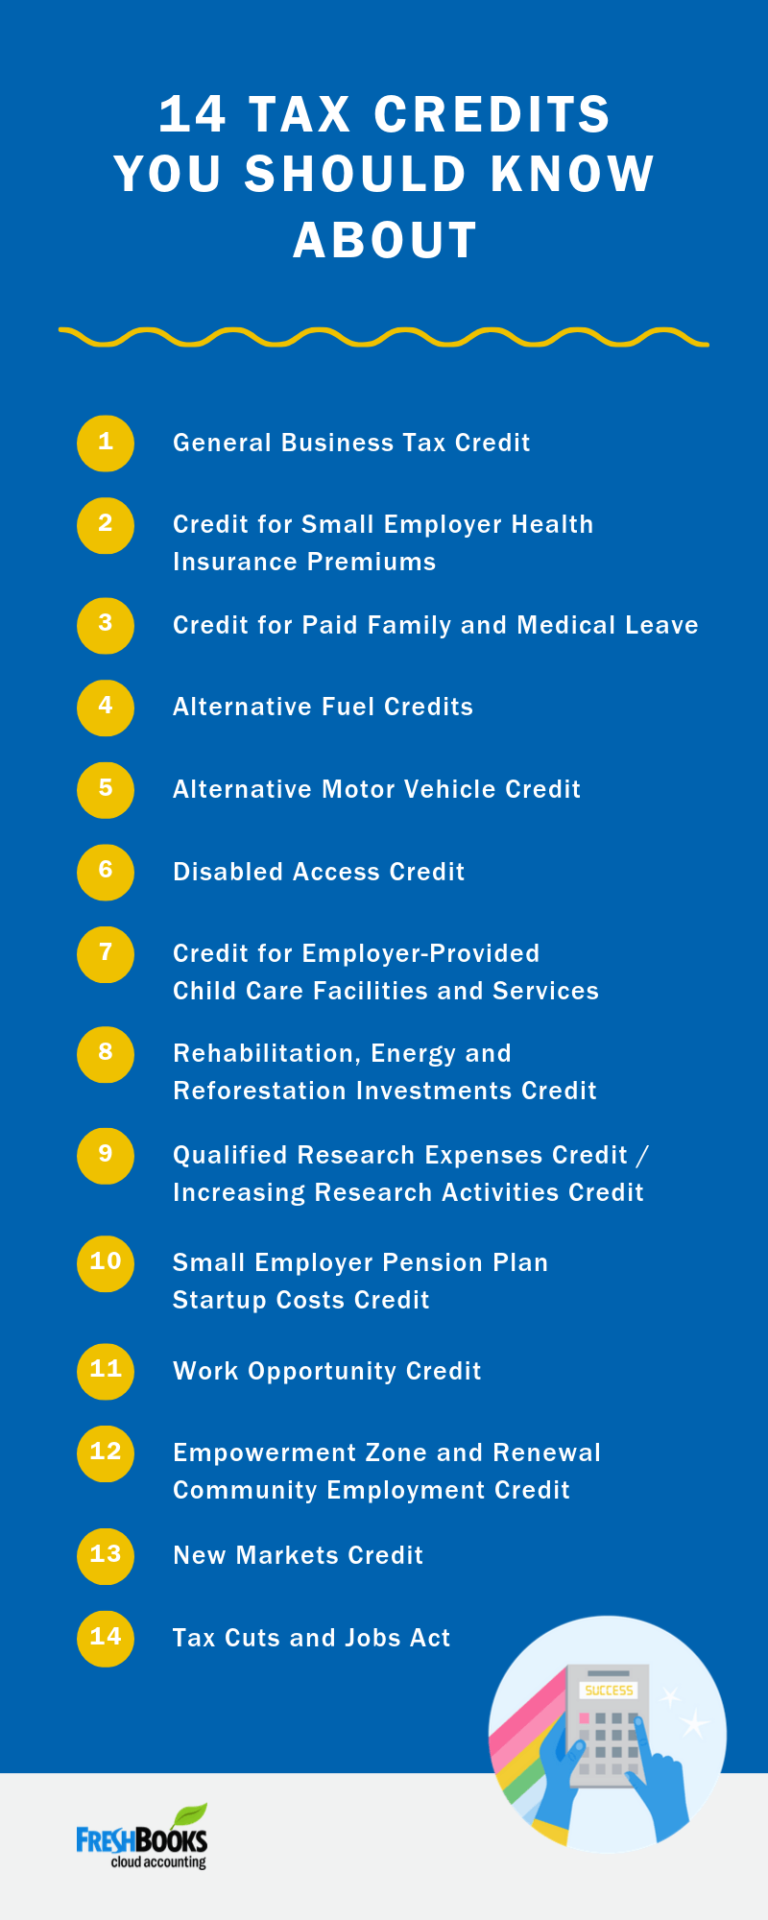 Your Complete Guide to 2020 U.S. Small Business Tax Credits